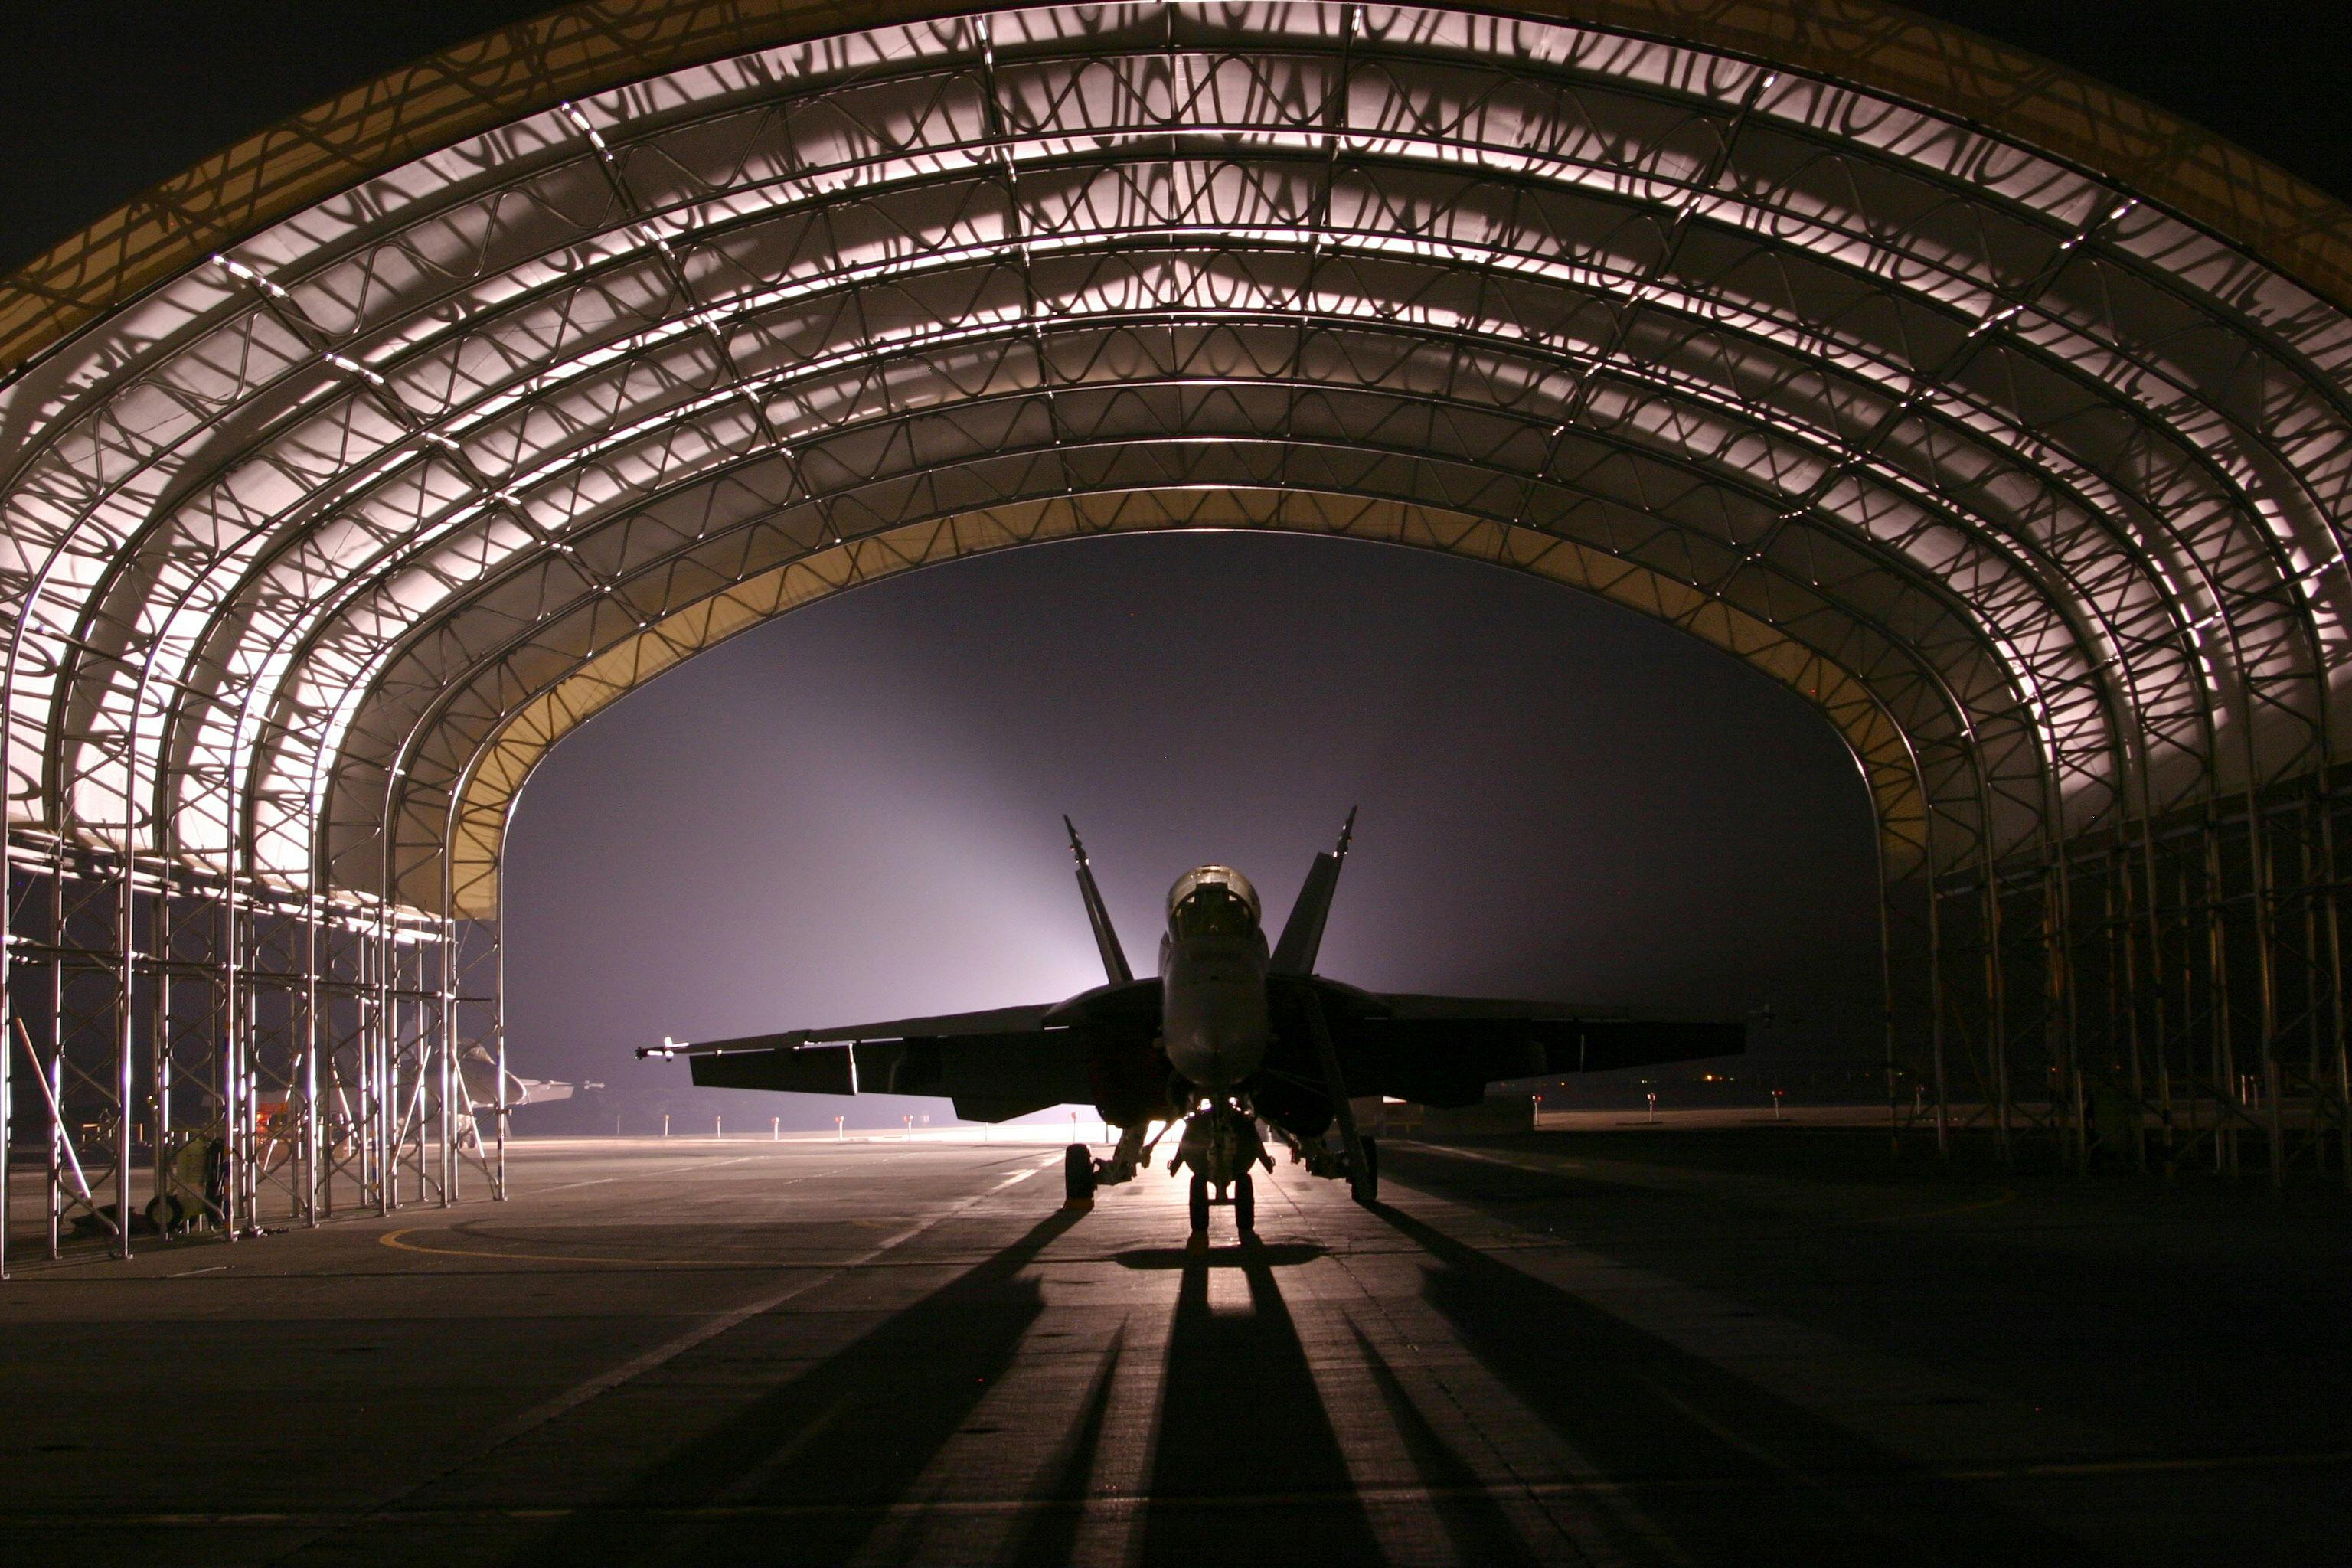 Wallpaper : air force, Turkish Armed Forces, hangar 1280x800 - Psychogist -  1161495 - HD Wallpapers - WallHere